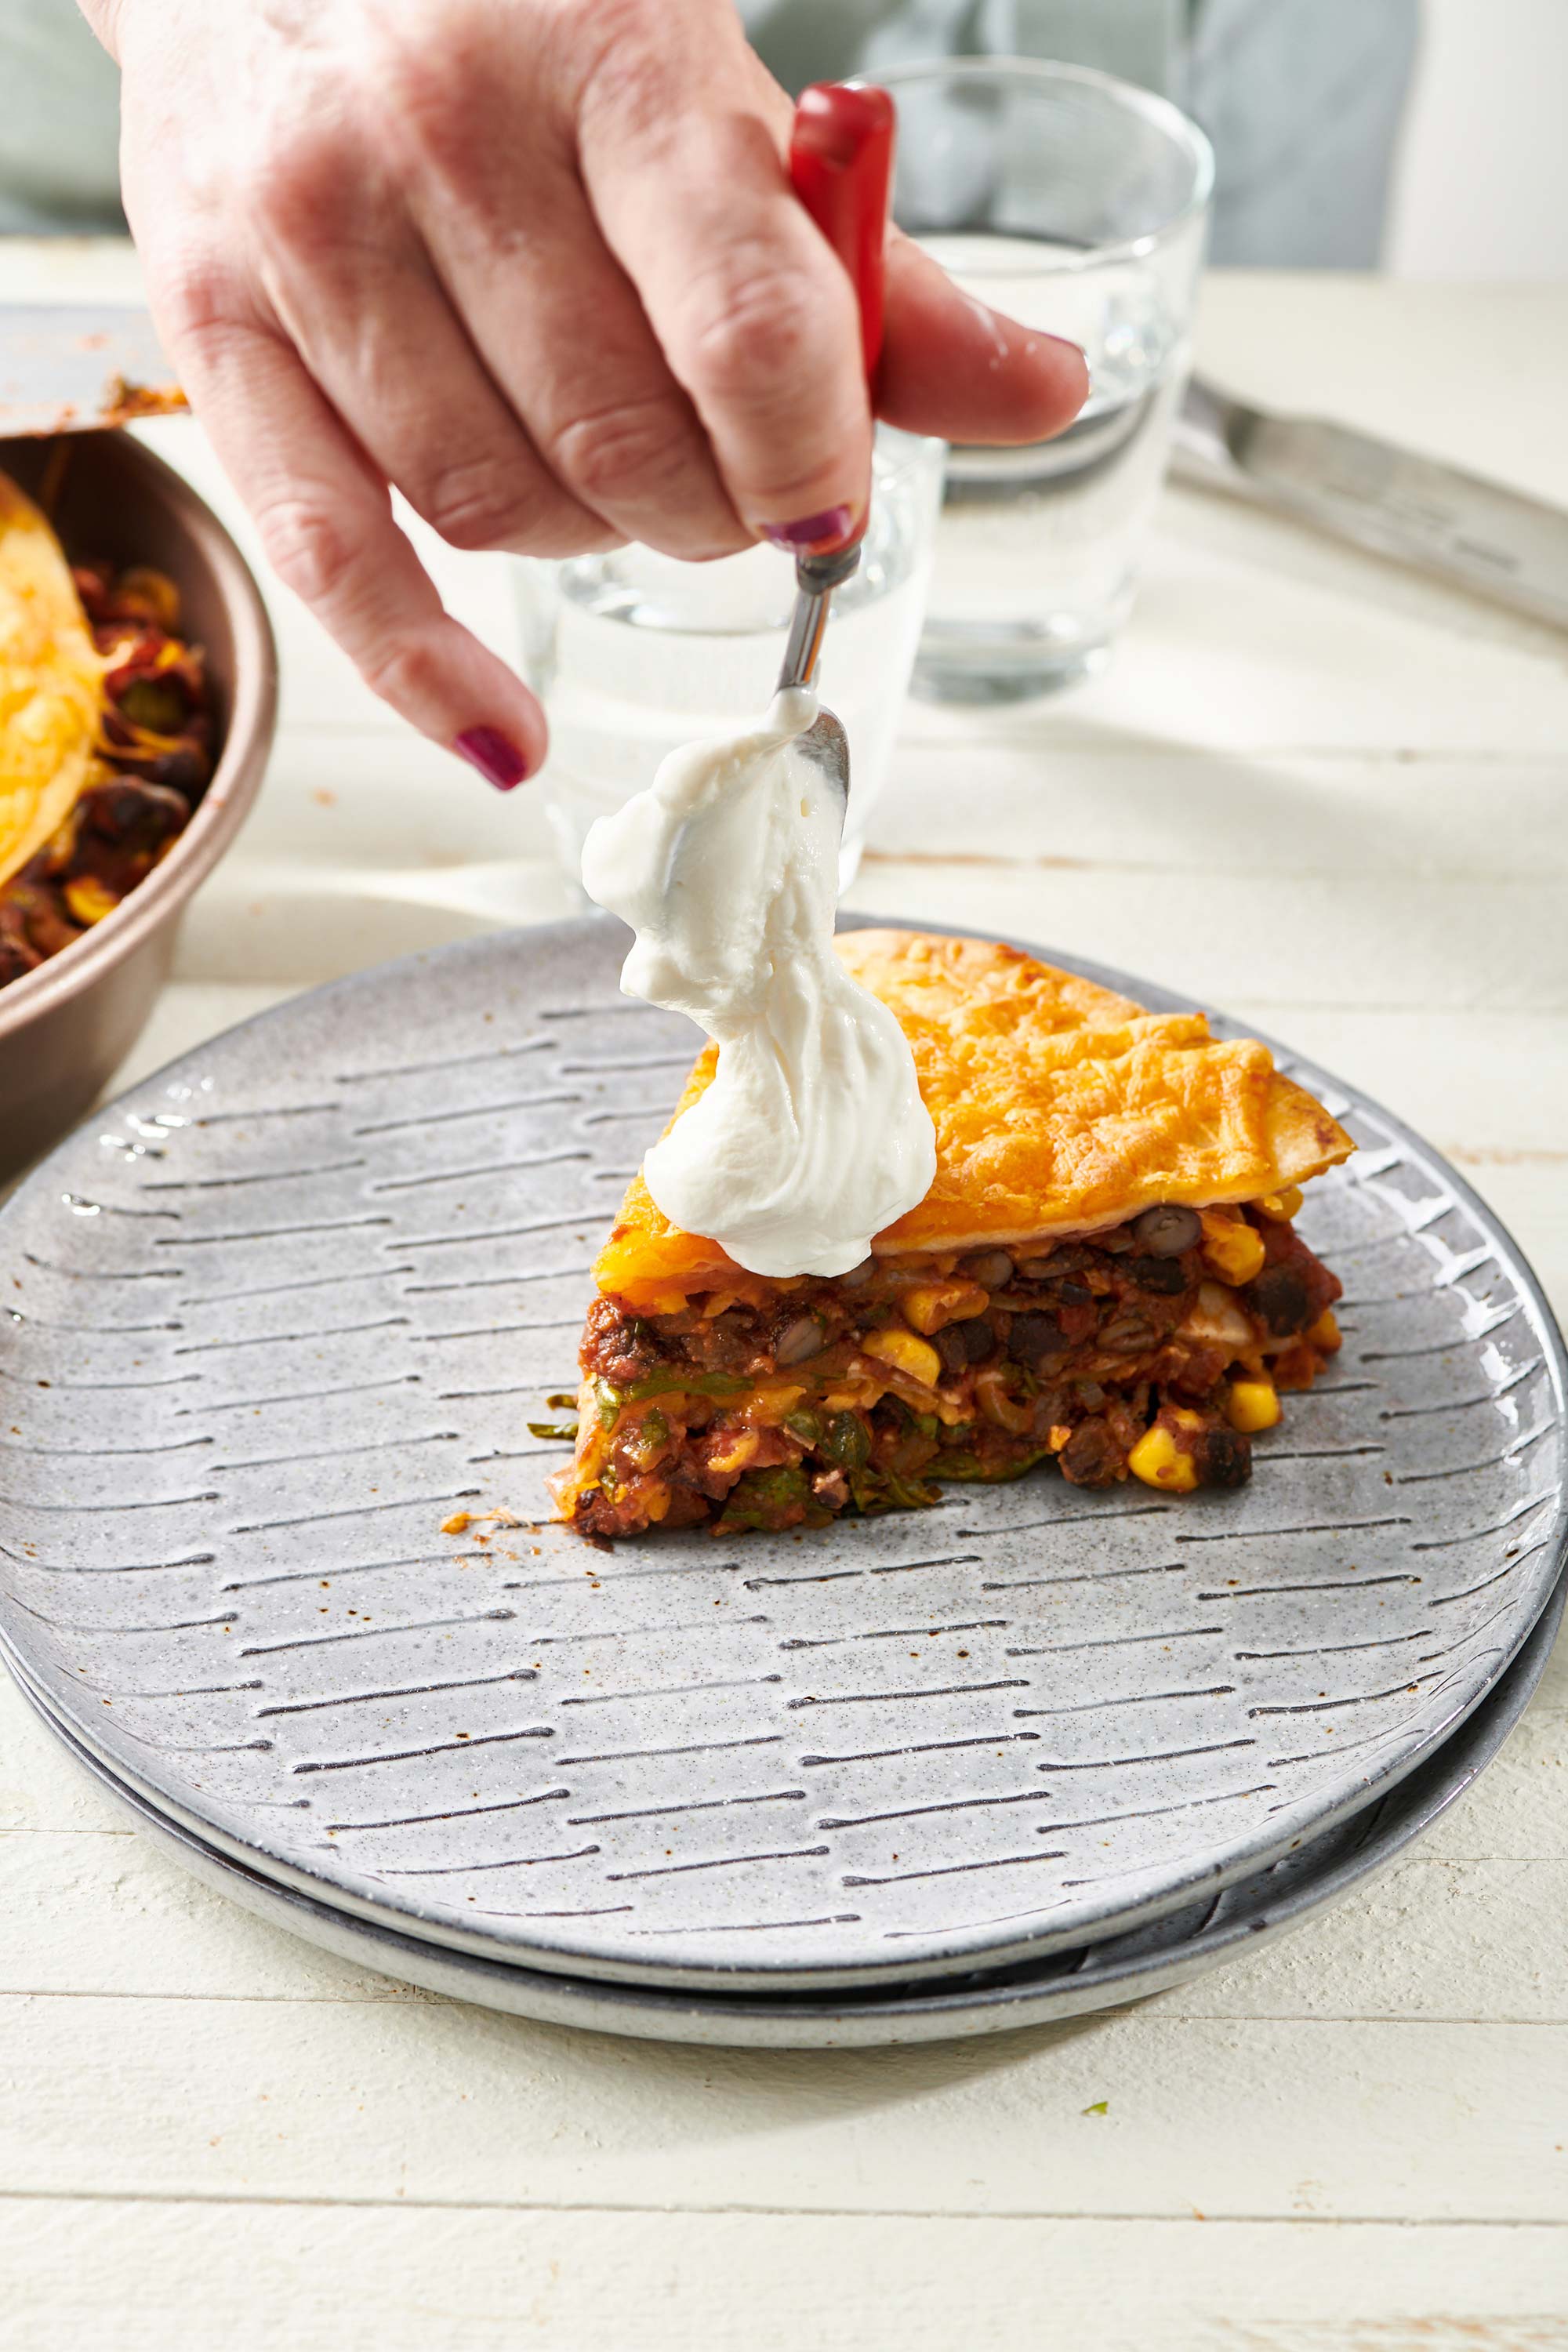 Spoon putting a dollop of sour cream on a slice of Vegetarian Mexican Lasagna.